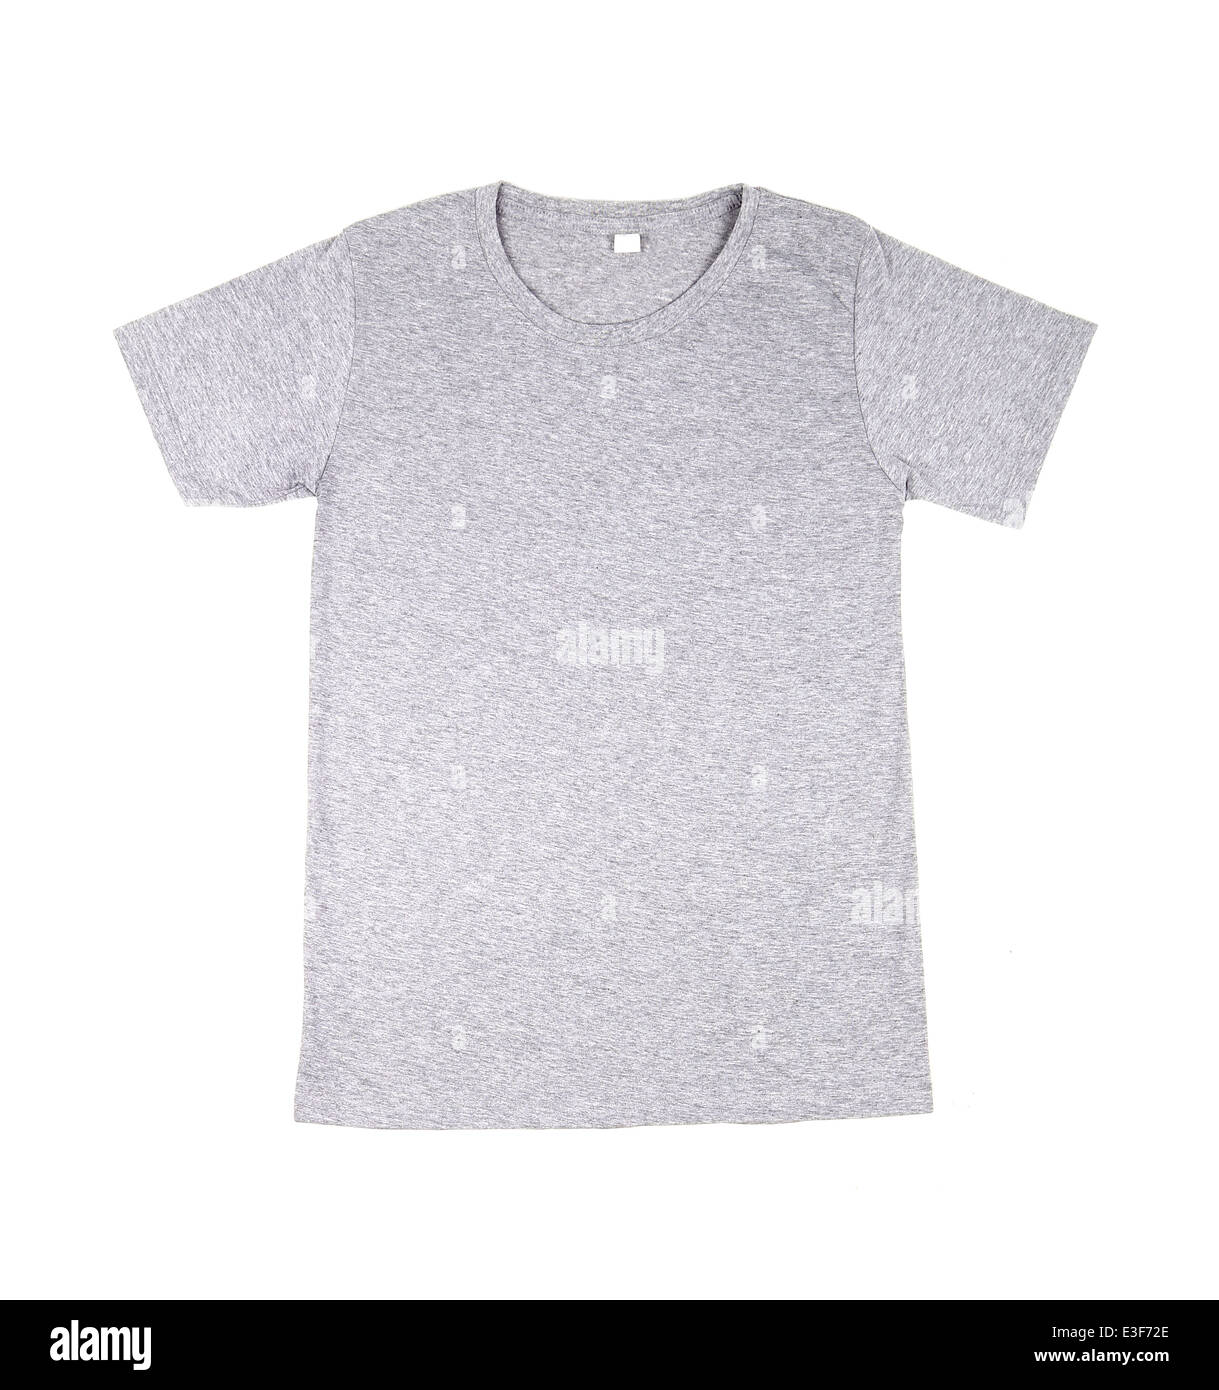 gray t-shirt template (front side) on white background Stock Photo